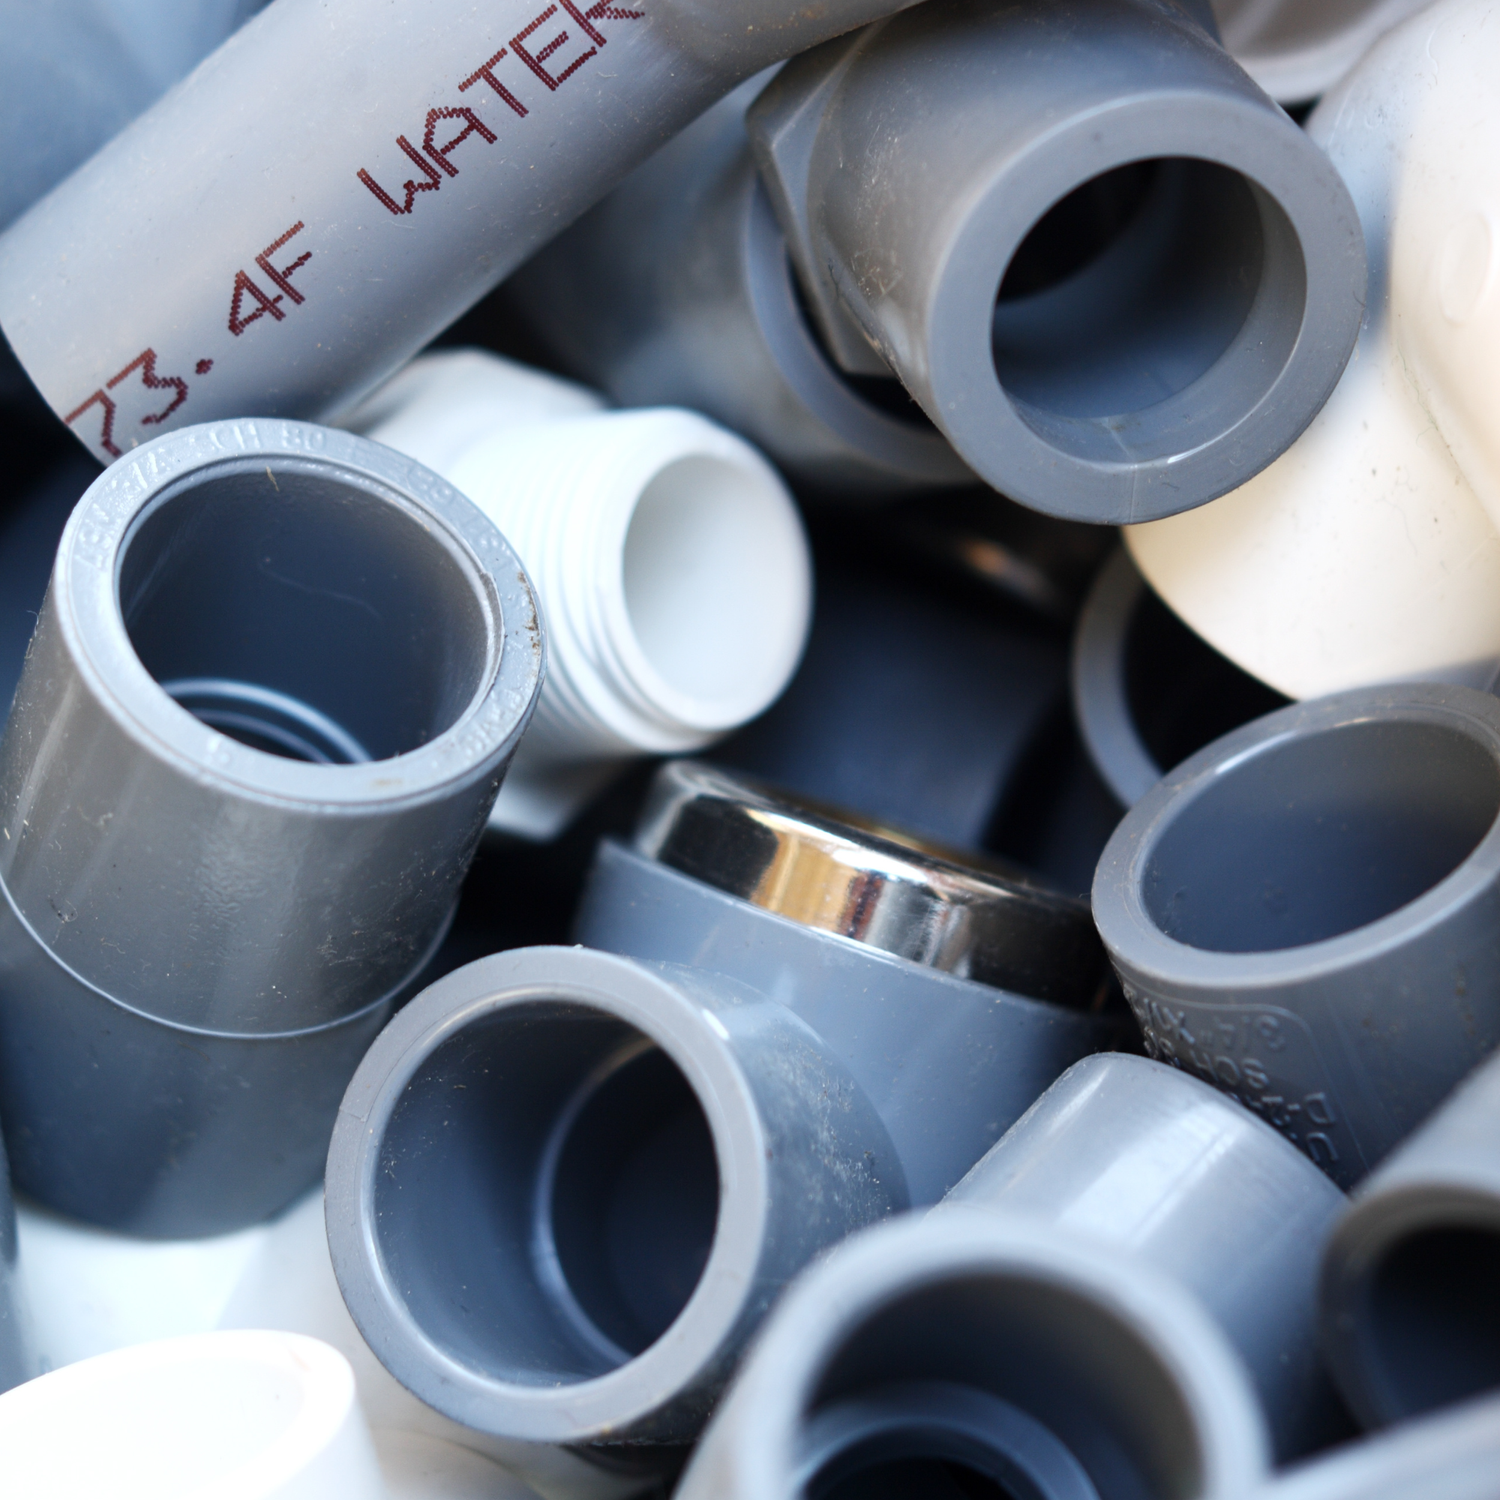 New Report Raises Questions About Safety of Using PVC Plastic Pipes for  Drinking Water — Beyond Plastics - Working To End Single-Use Plastic  Pollution